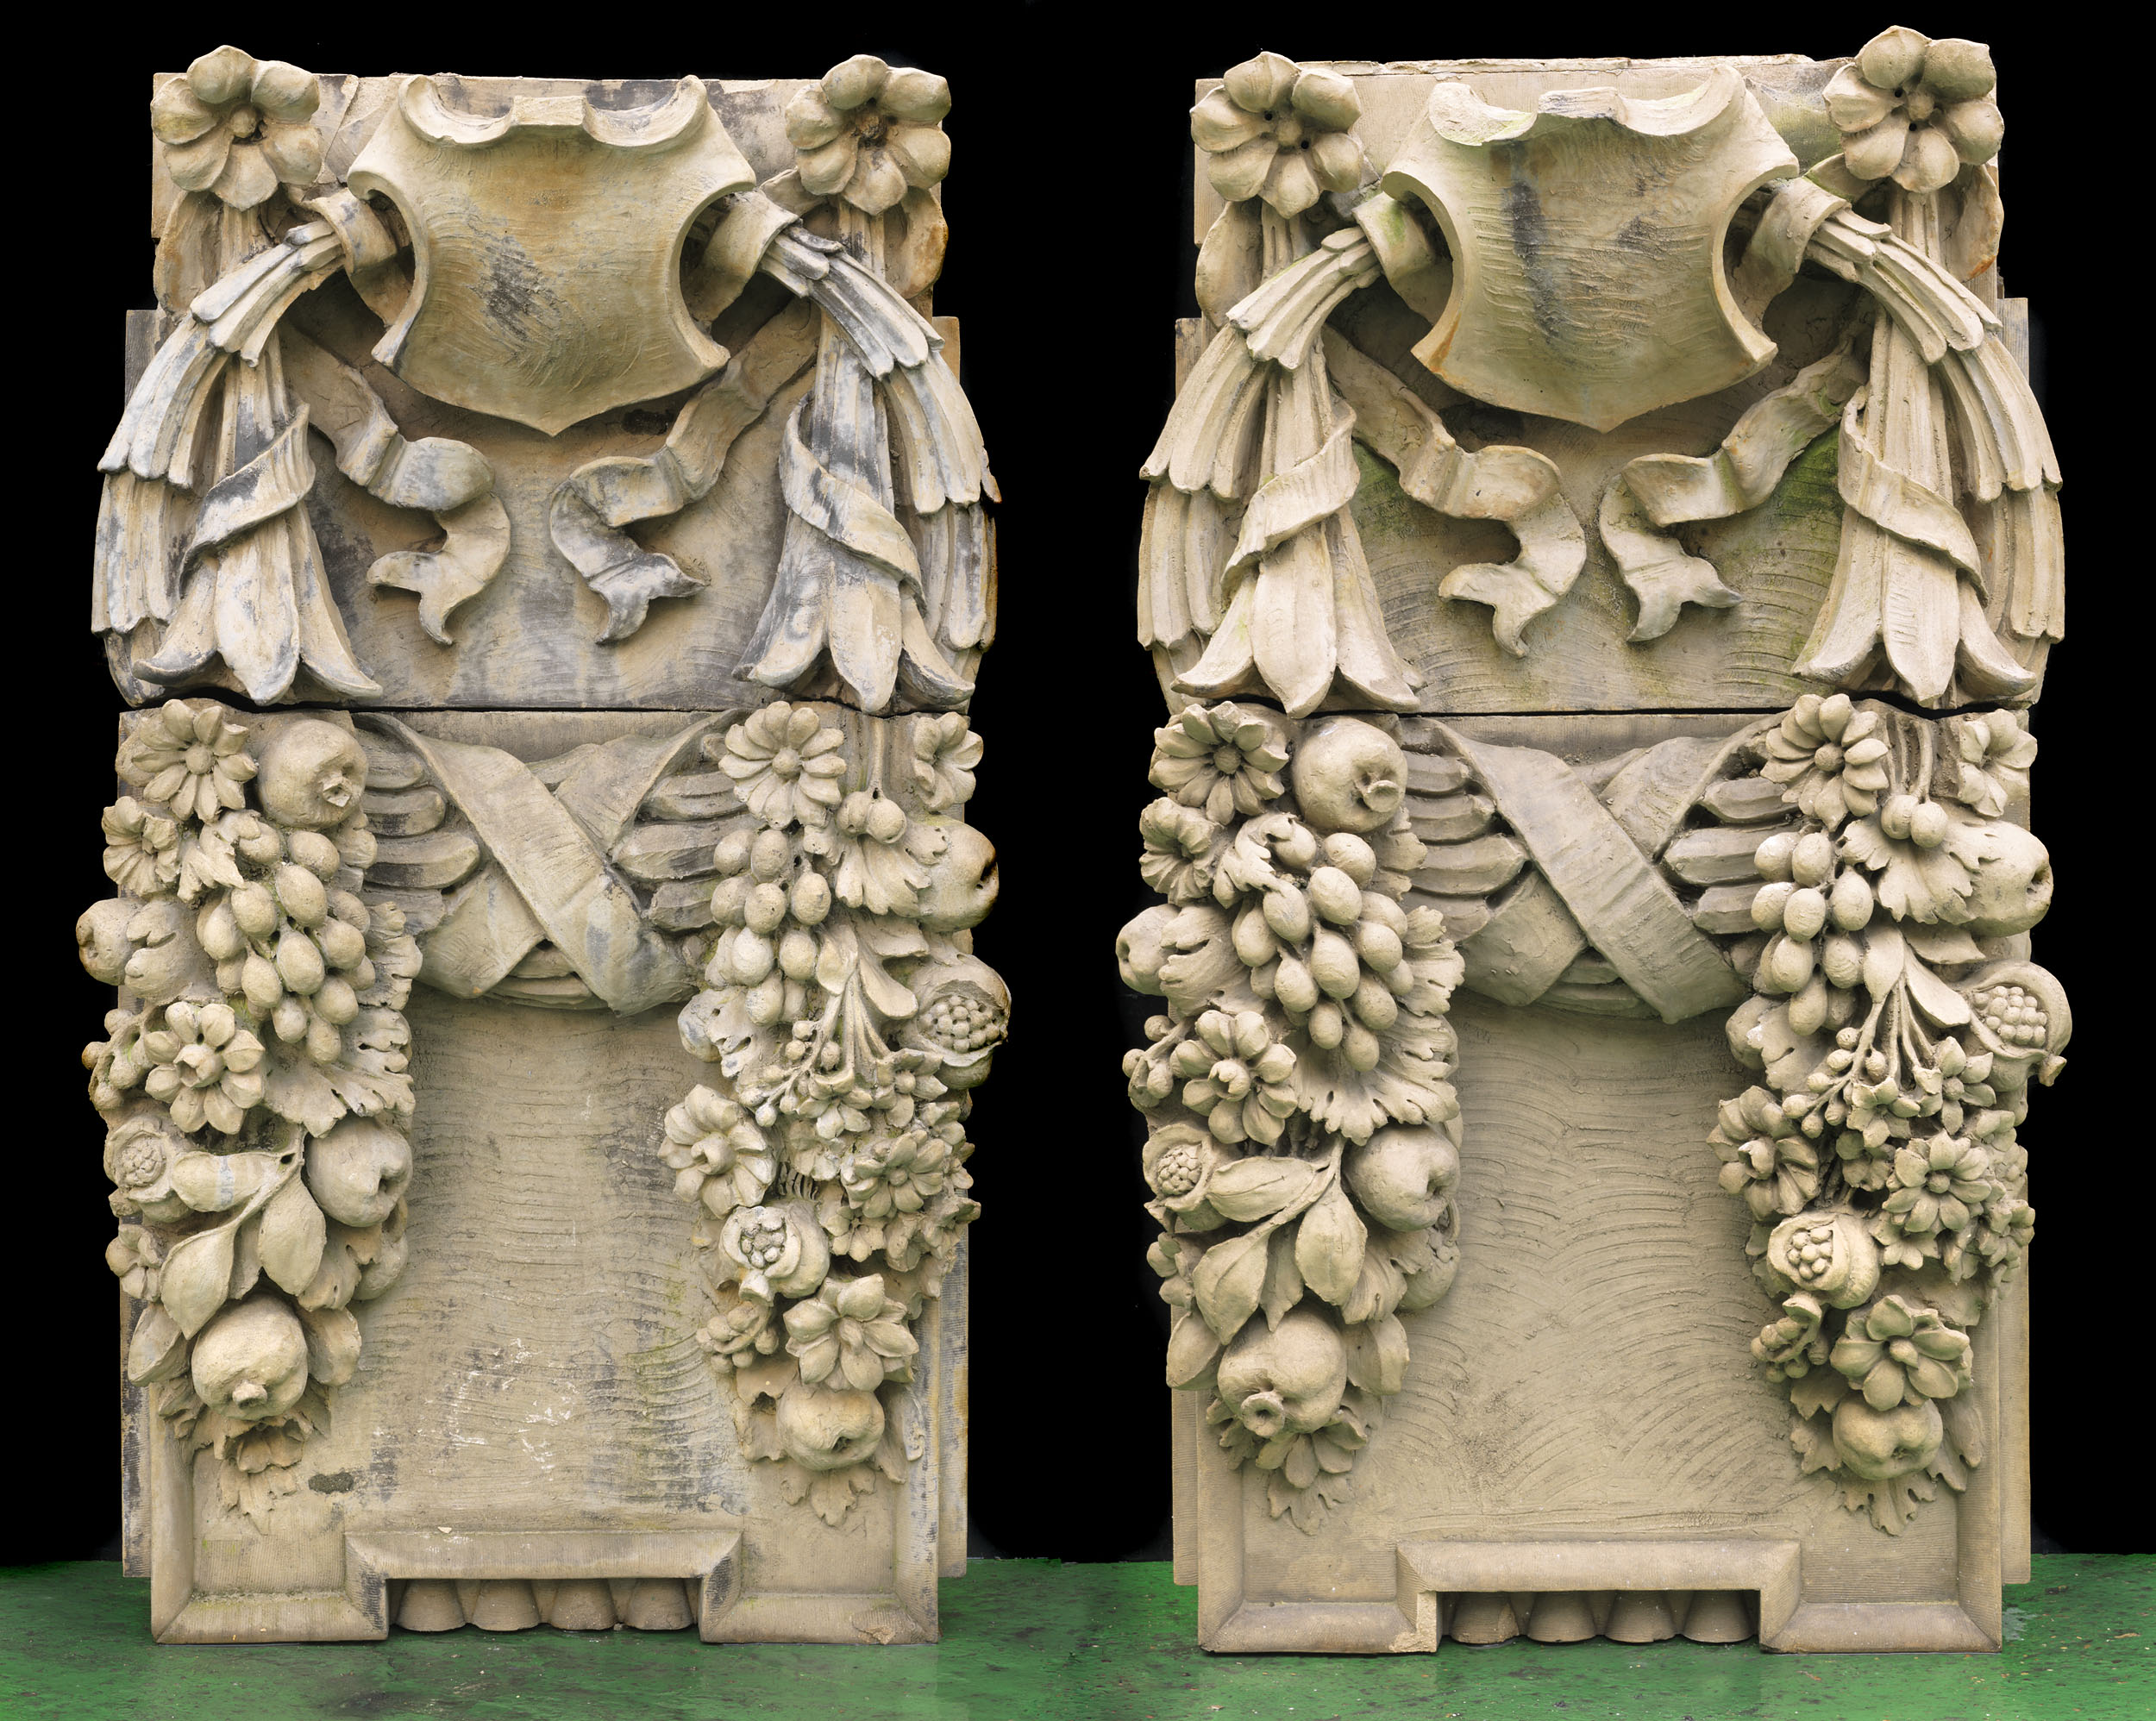 A Pair of Crosse & Blackwell Wall Sculptures
